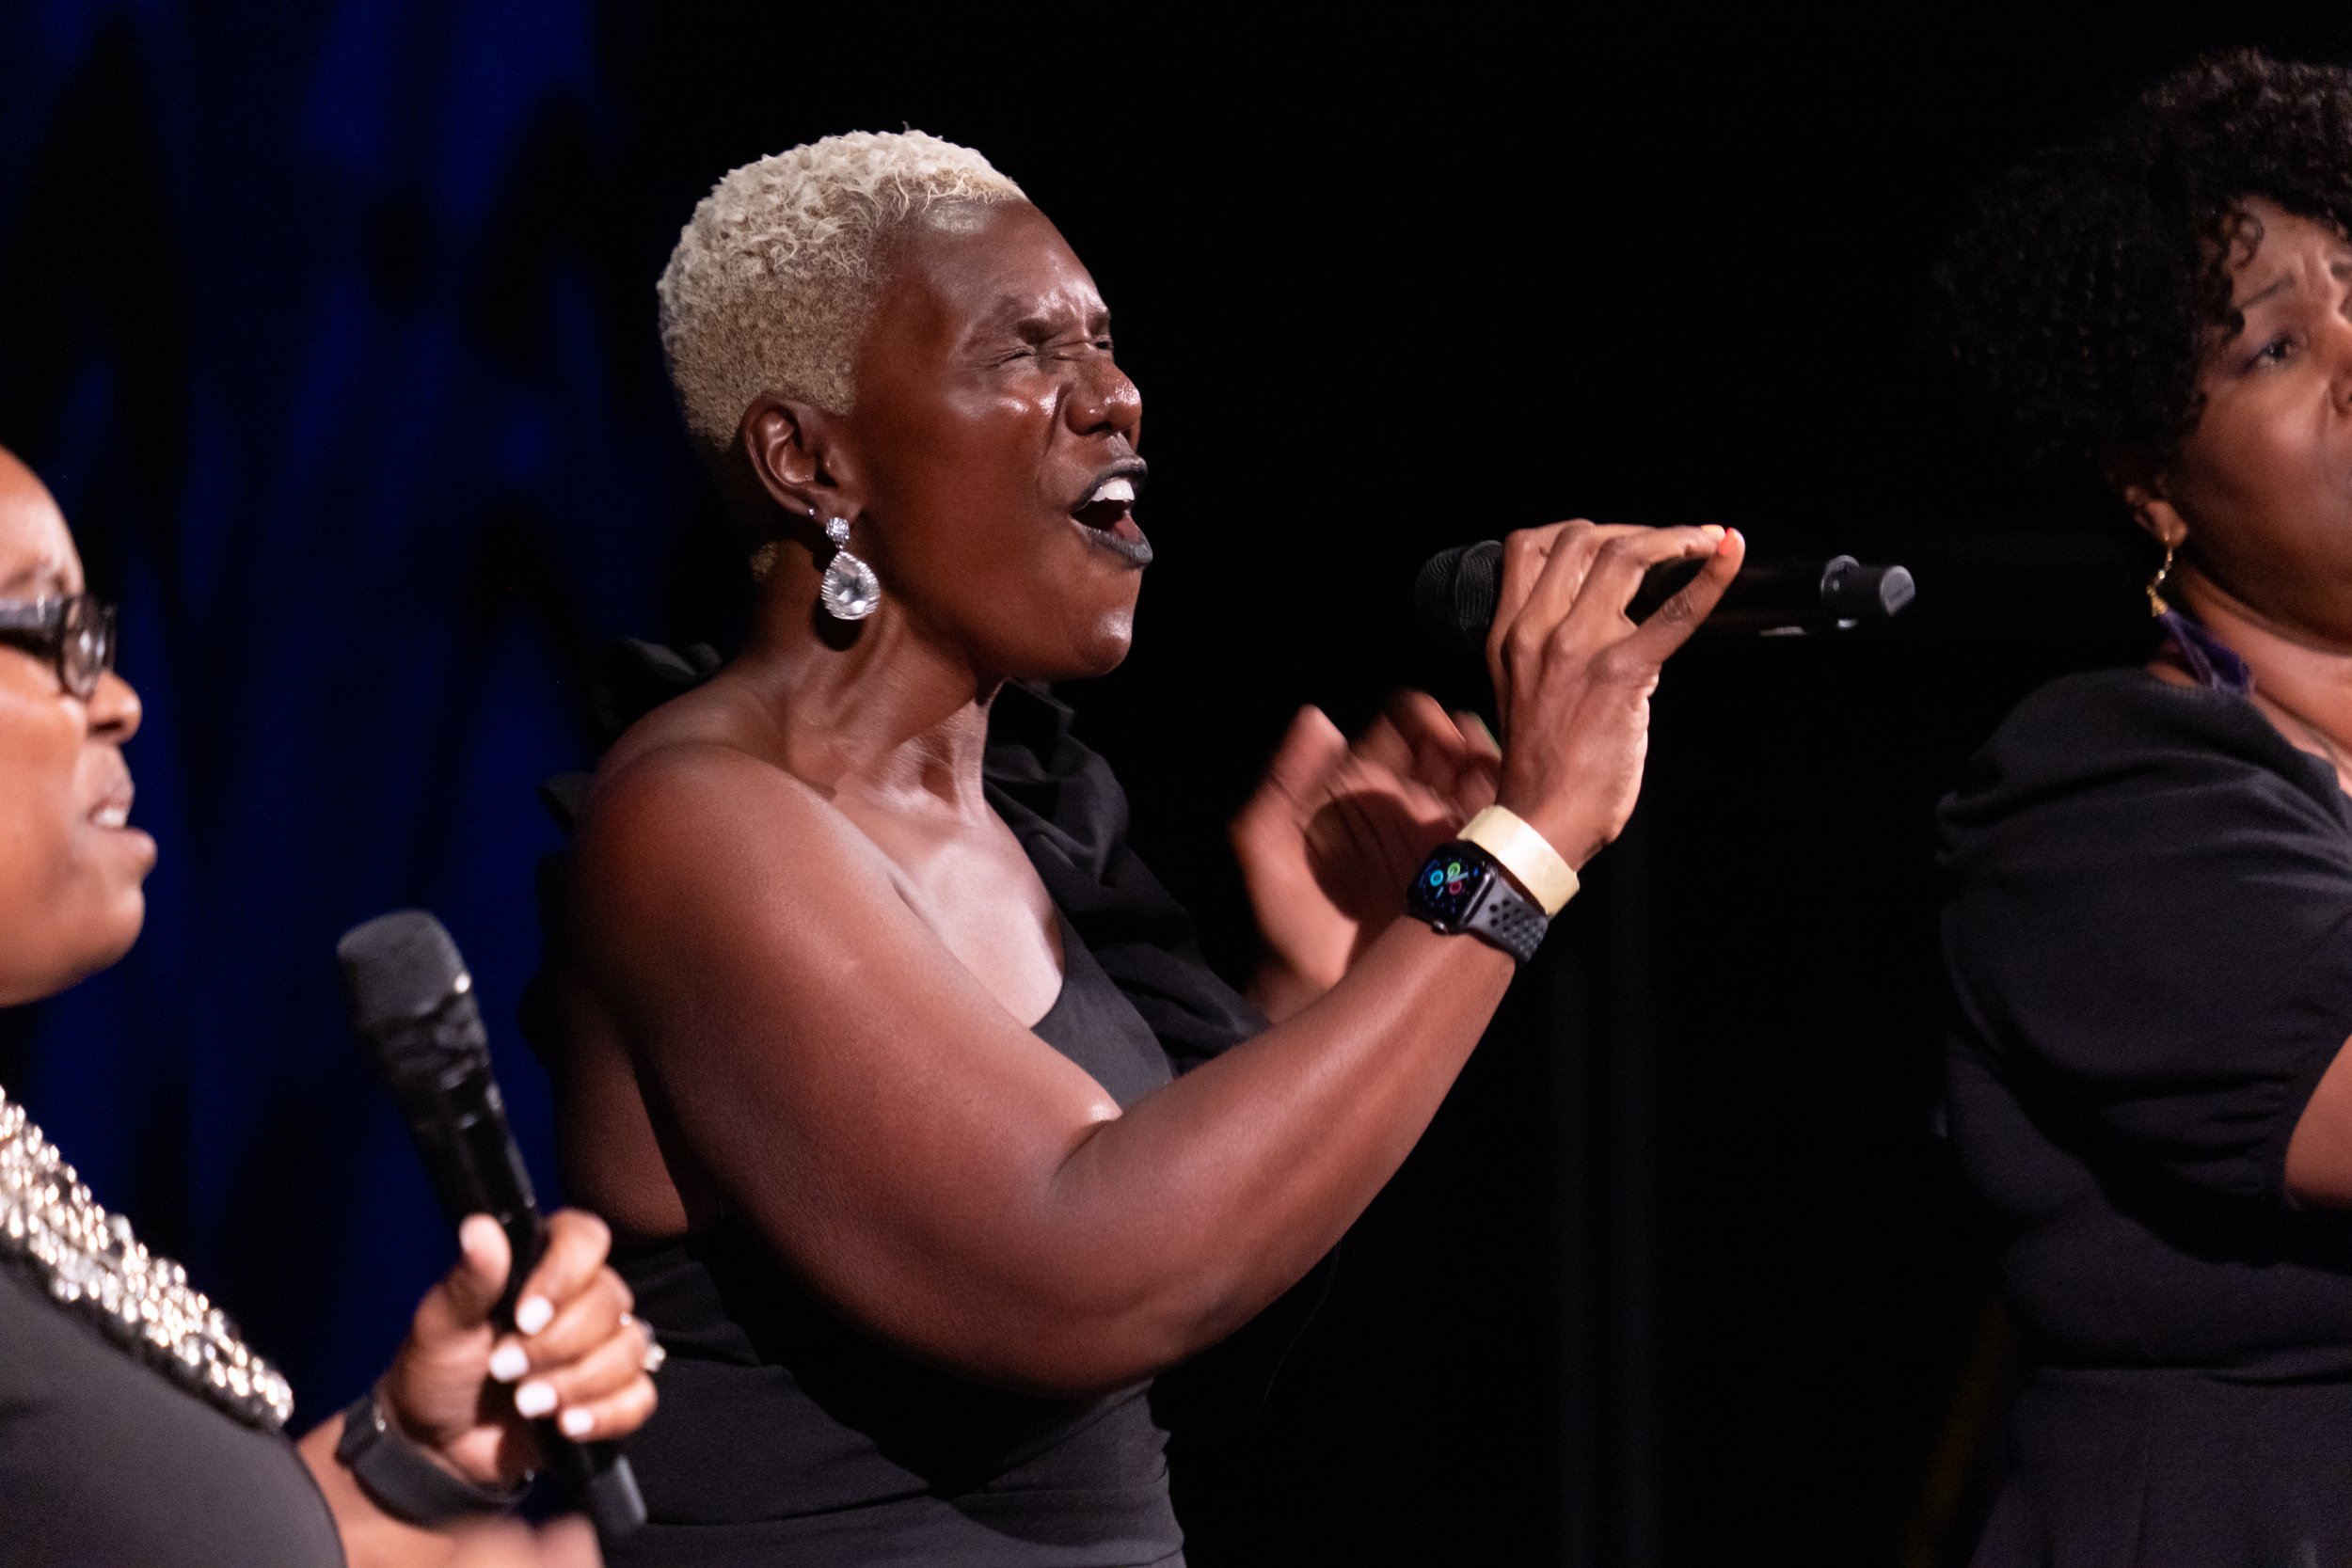  Edith Marlo Wright and her group Ambassadors of Christ (AOC) blessed us with a gospel performance of “Total Praise” with transcendent harmonies, bringing so much joy and power to the stage.  